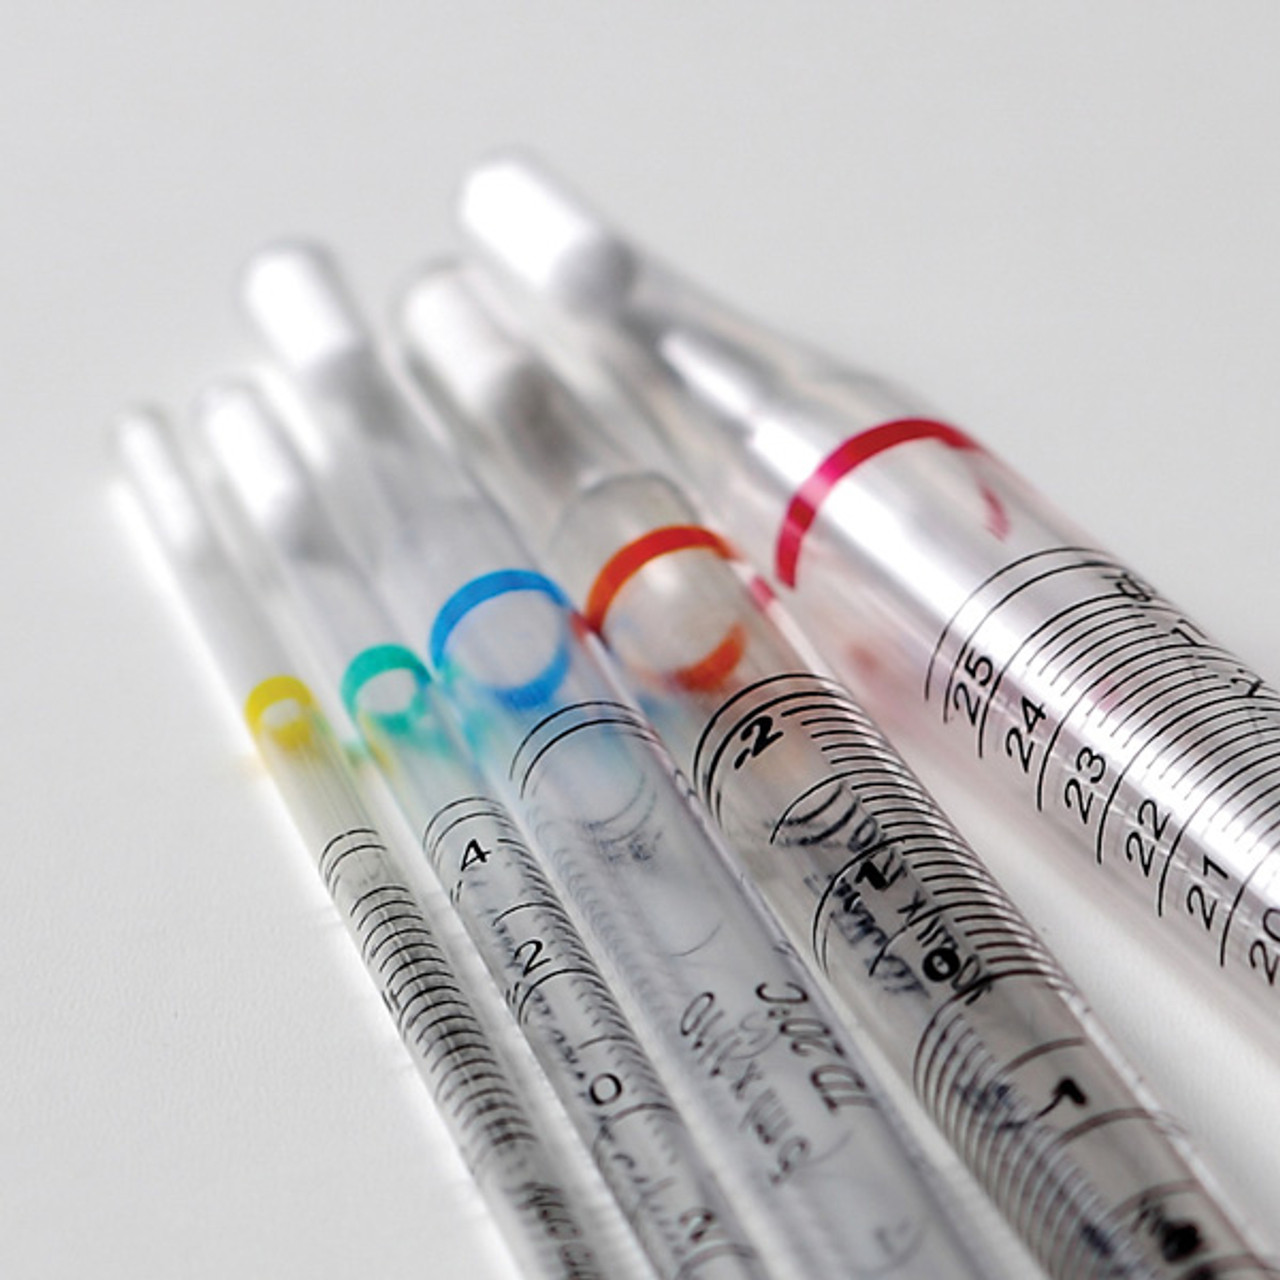 Color-coded serological pipettes for easy identification